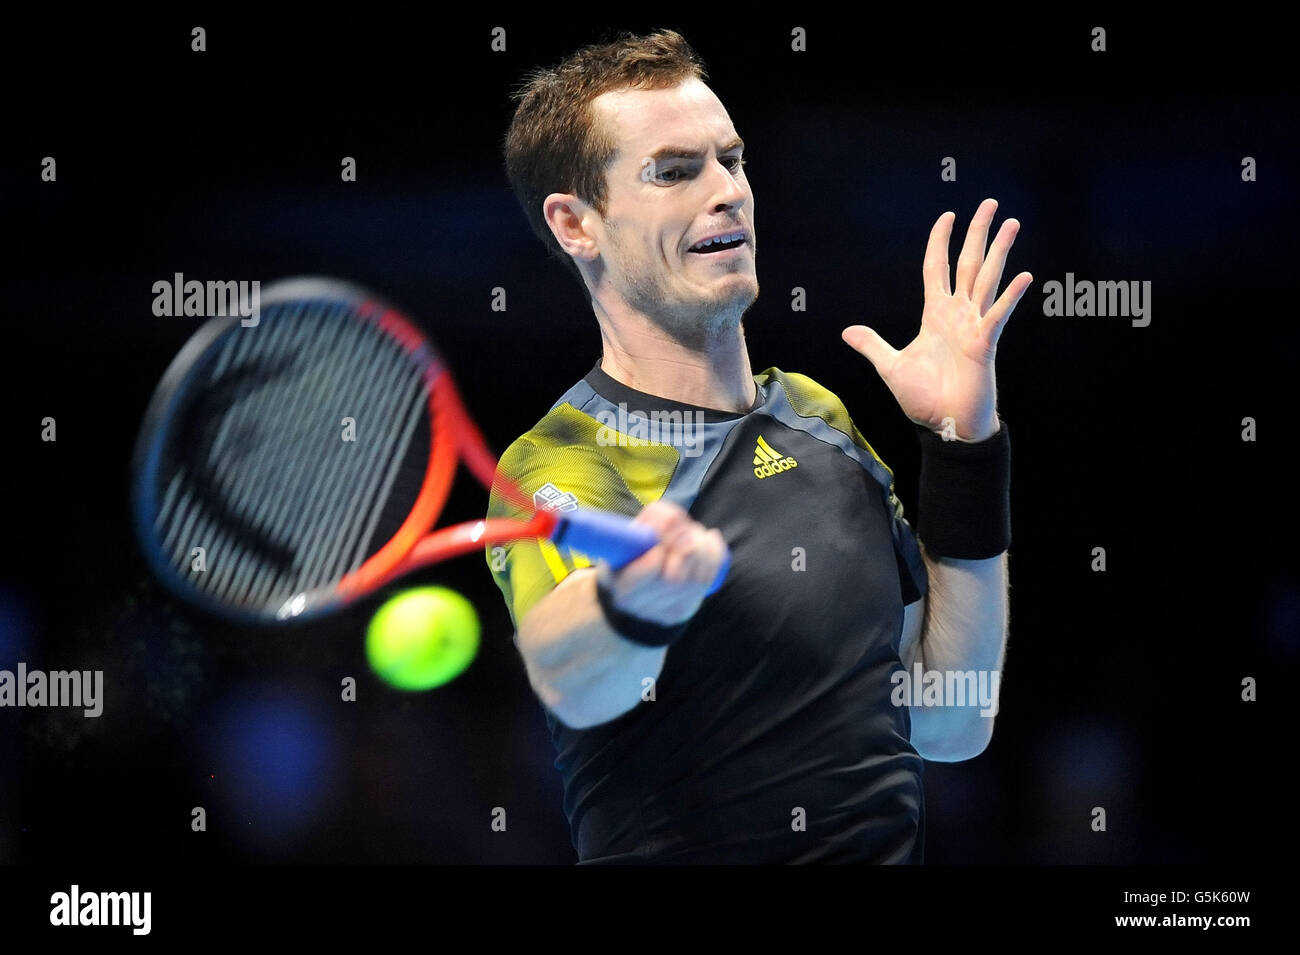 Great Britain's Andy Murray in action against the Czech Republic's Tomas Berdych during the Barclays ATP World Tour Finals at the O2 Arena, London. Stock Photo